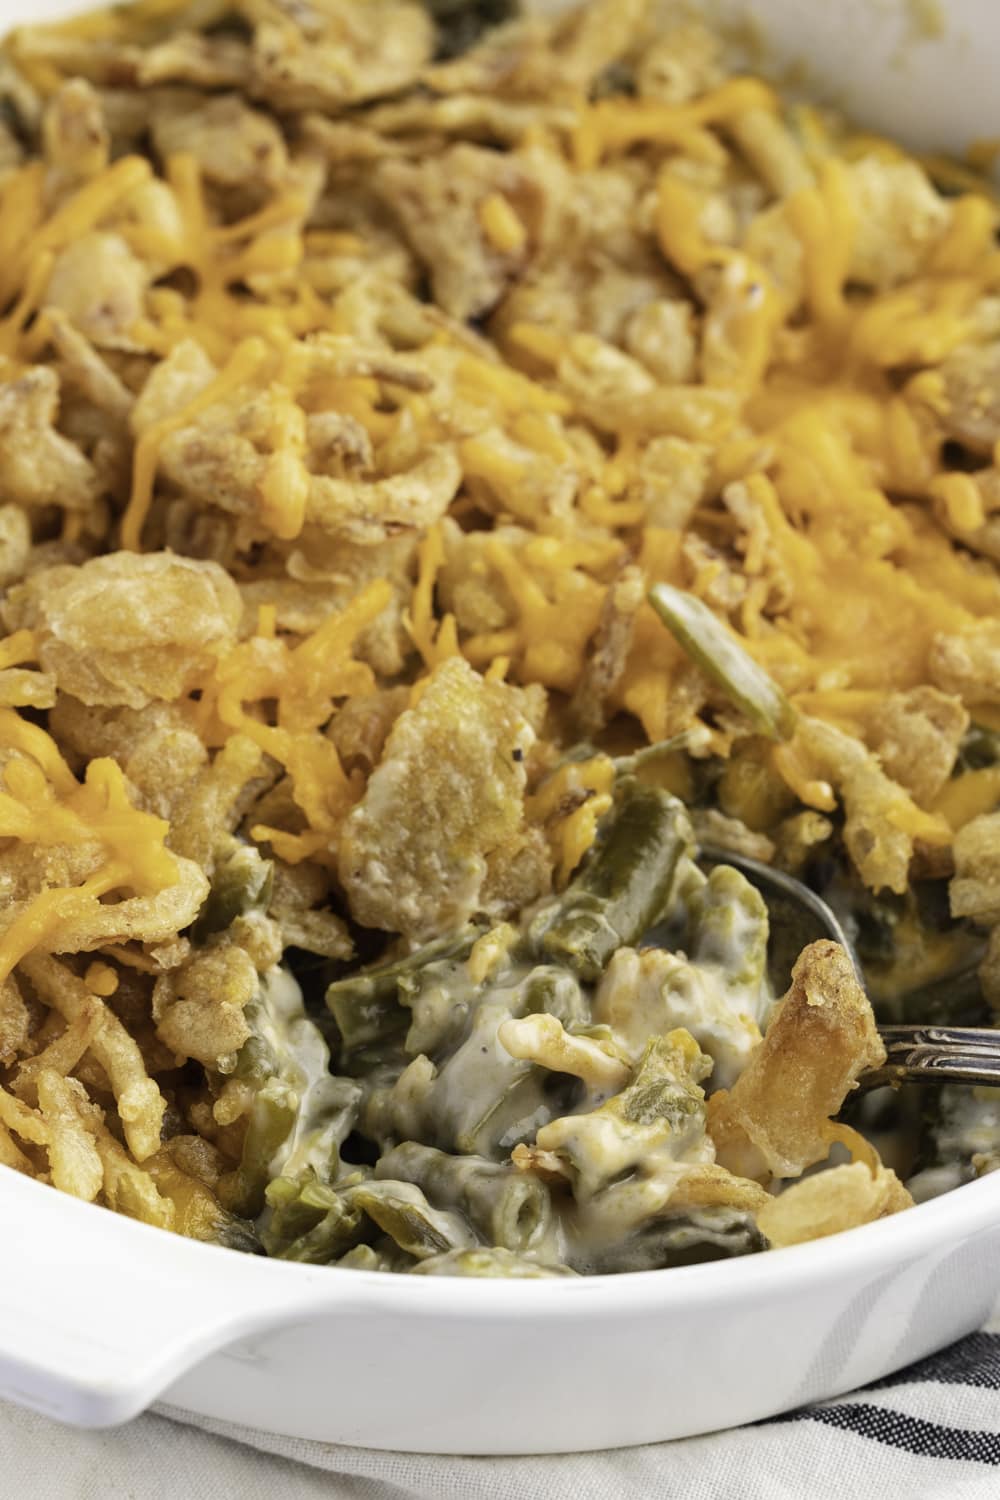 French's Green Bean Casserole Served in a White Dish